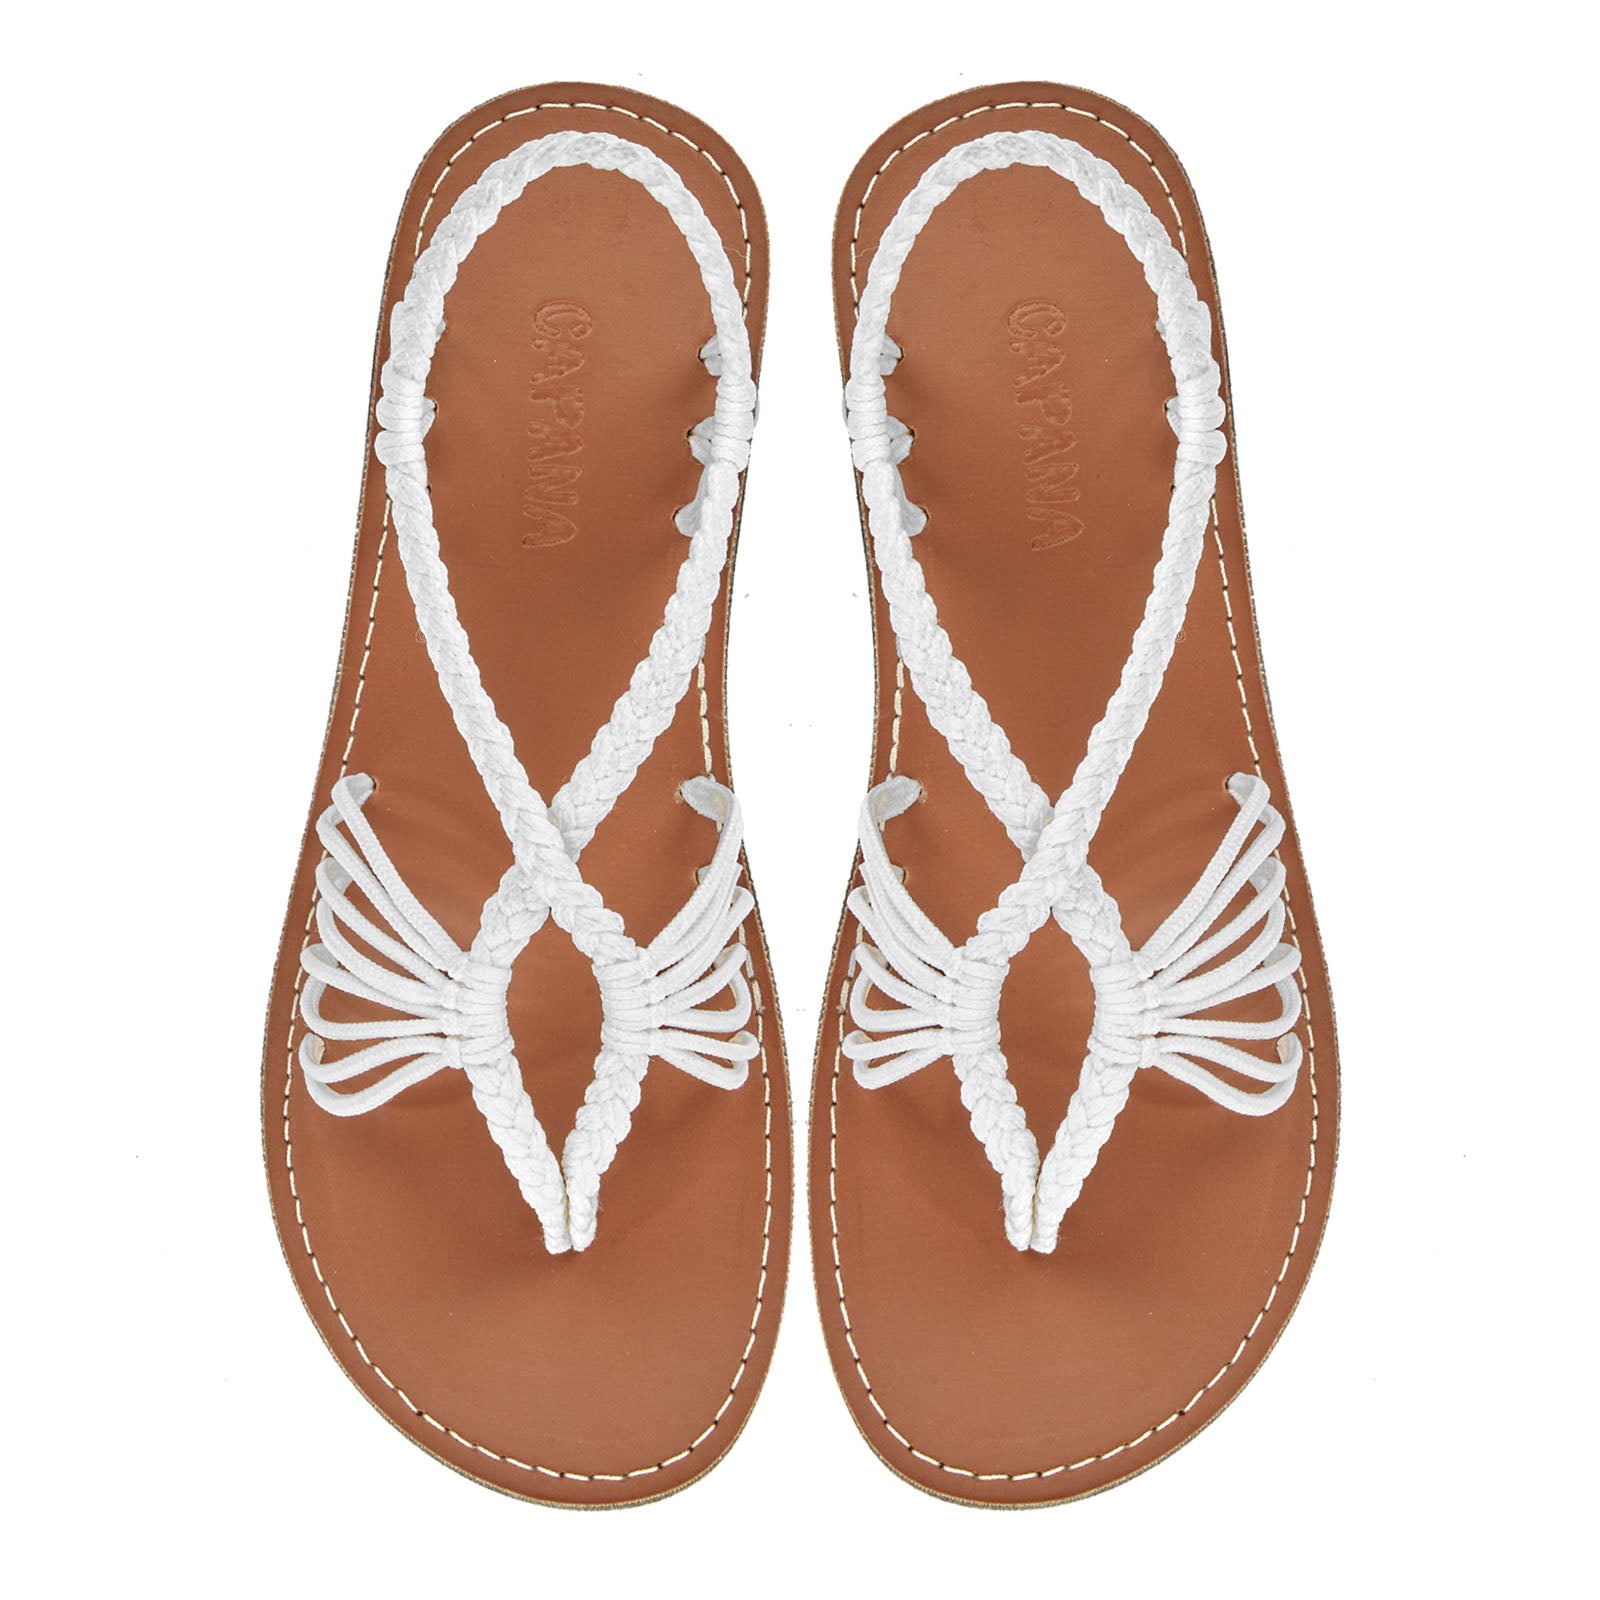 Cocoon White Rope Sandals Pure White thong design Flat sandals for women